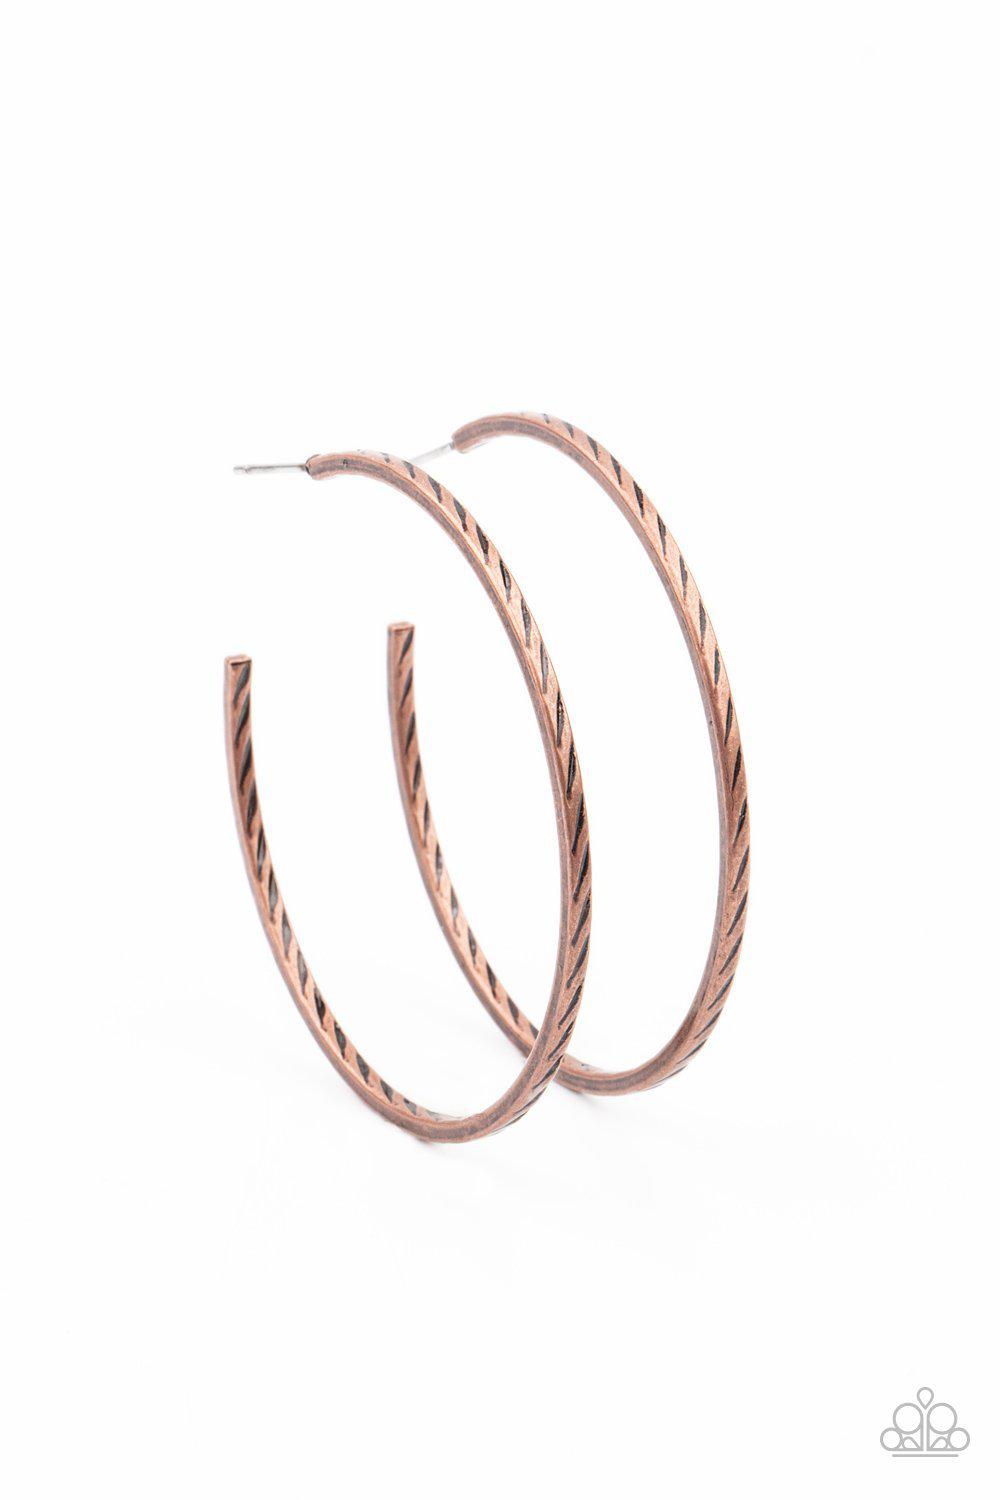 Rural Reserve Copper Hoop Earrings - Paparazzi Accessories- lightbox - CarasShop.com - $5 Jewelry by Cara Jewels